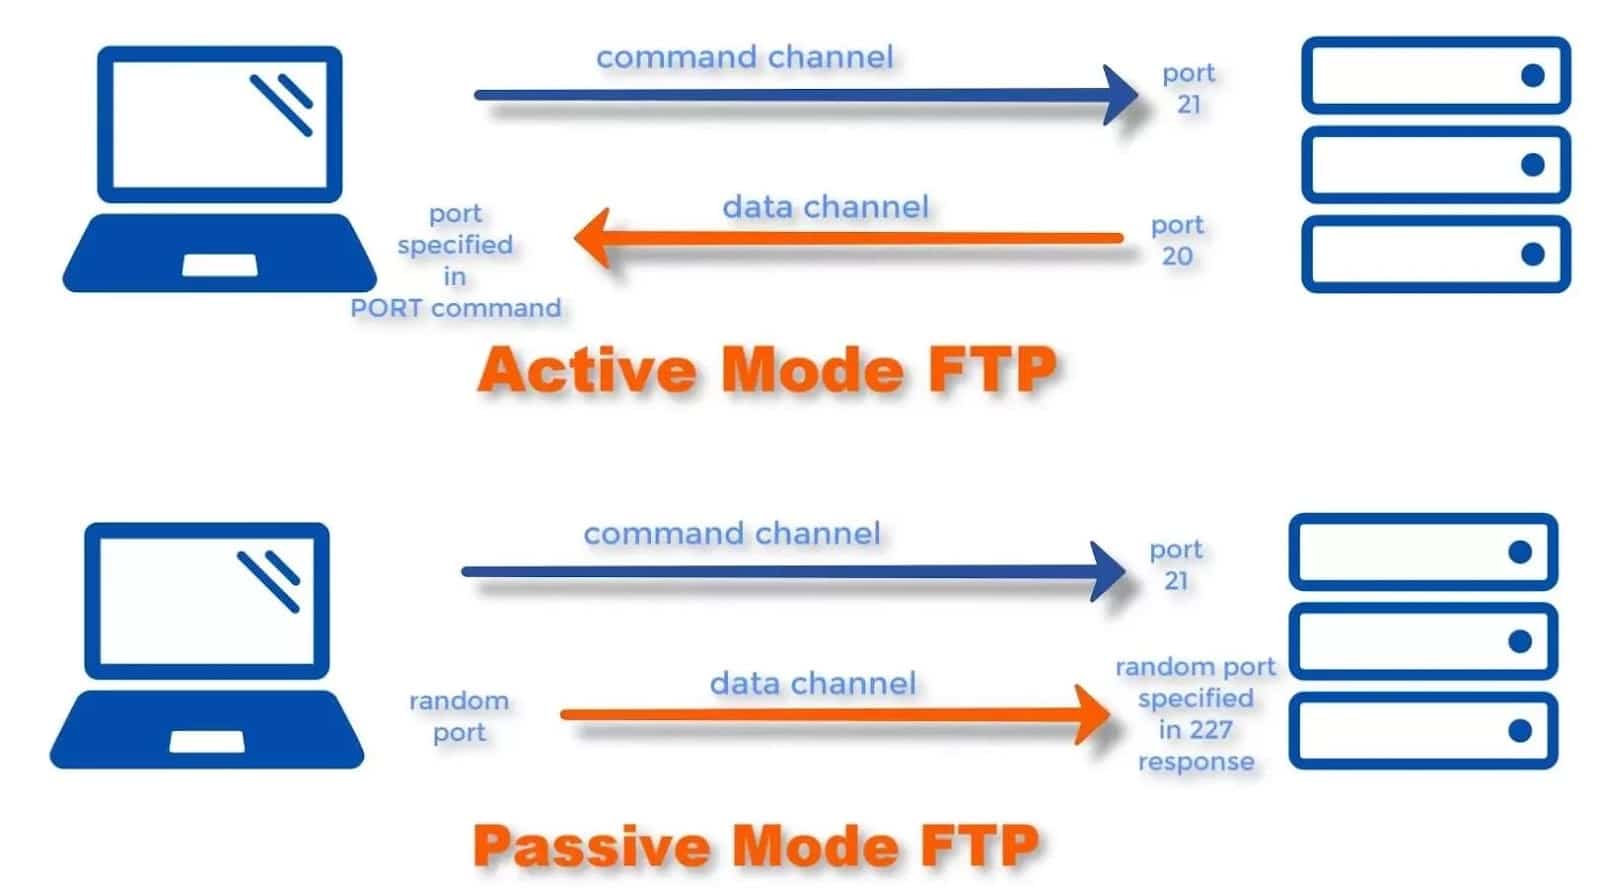 Active and passive FTP modes